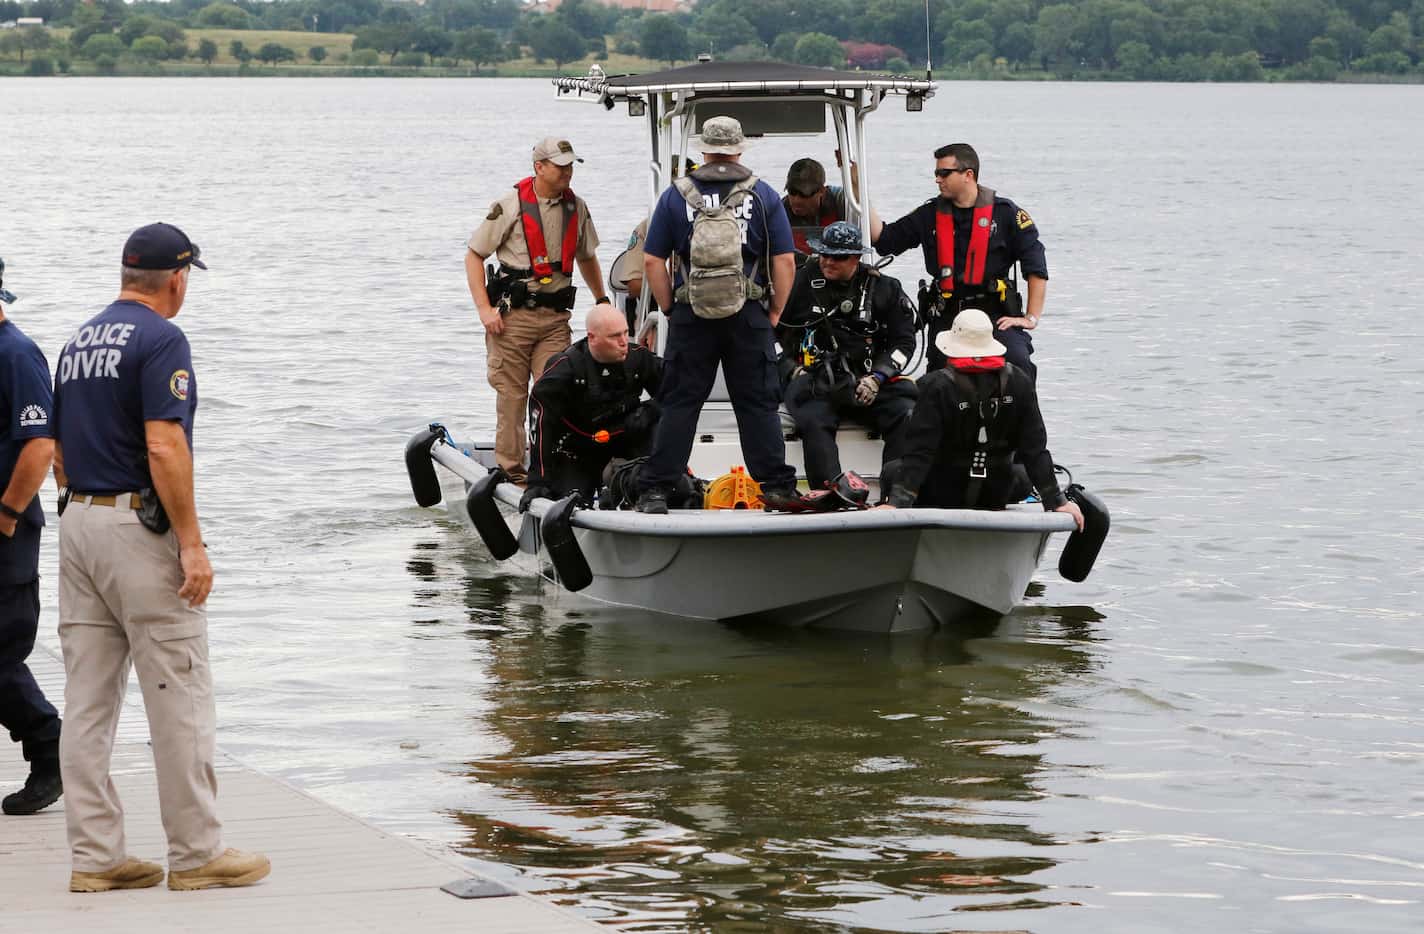 Sgt. Rod Dillon, dive team supervisor (left) watches as rescuers continue their search Monday.